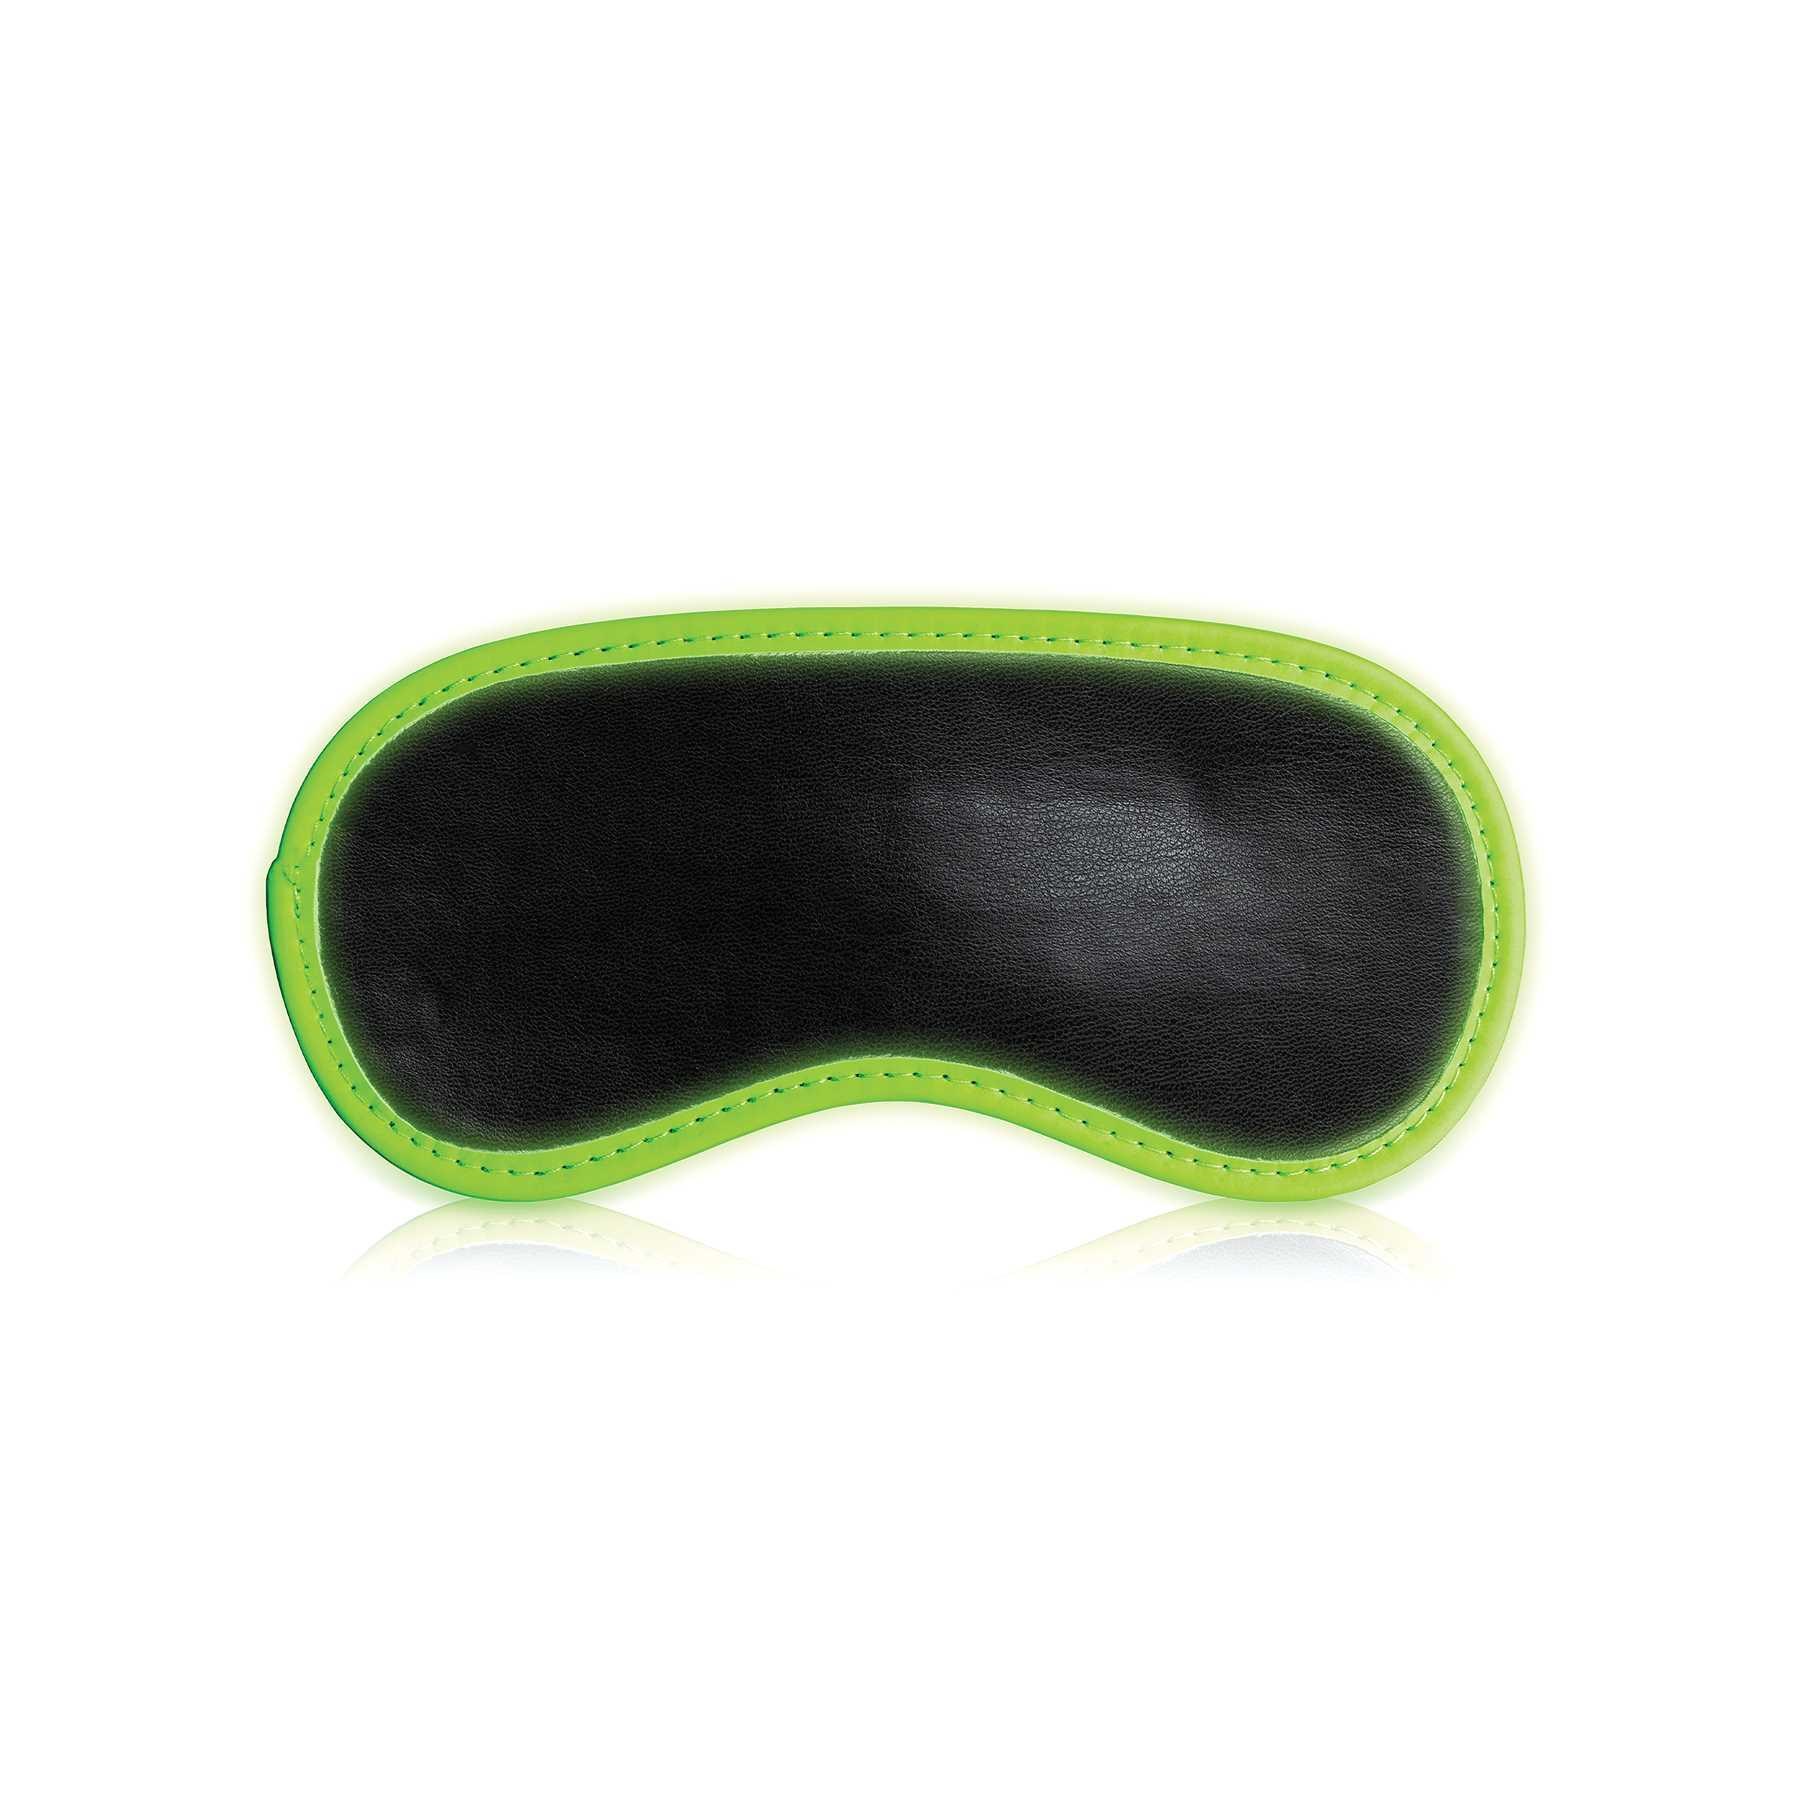 Ouch! Glow In The Dark Blindfold